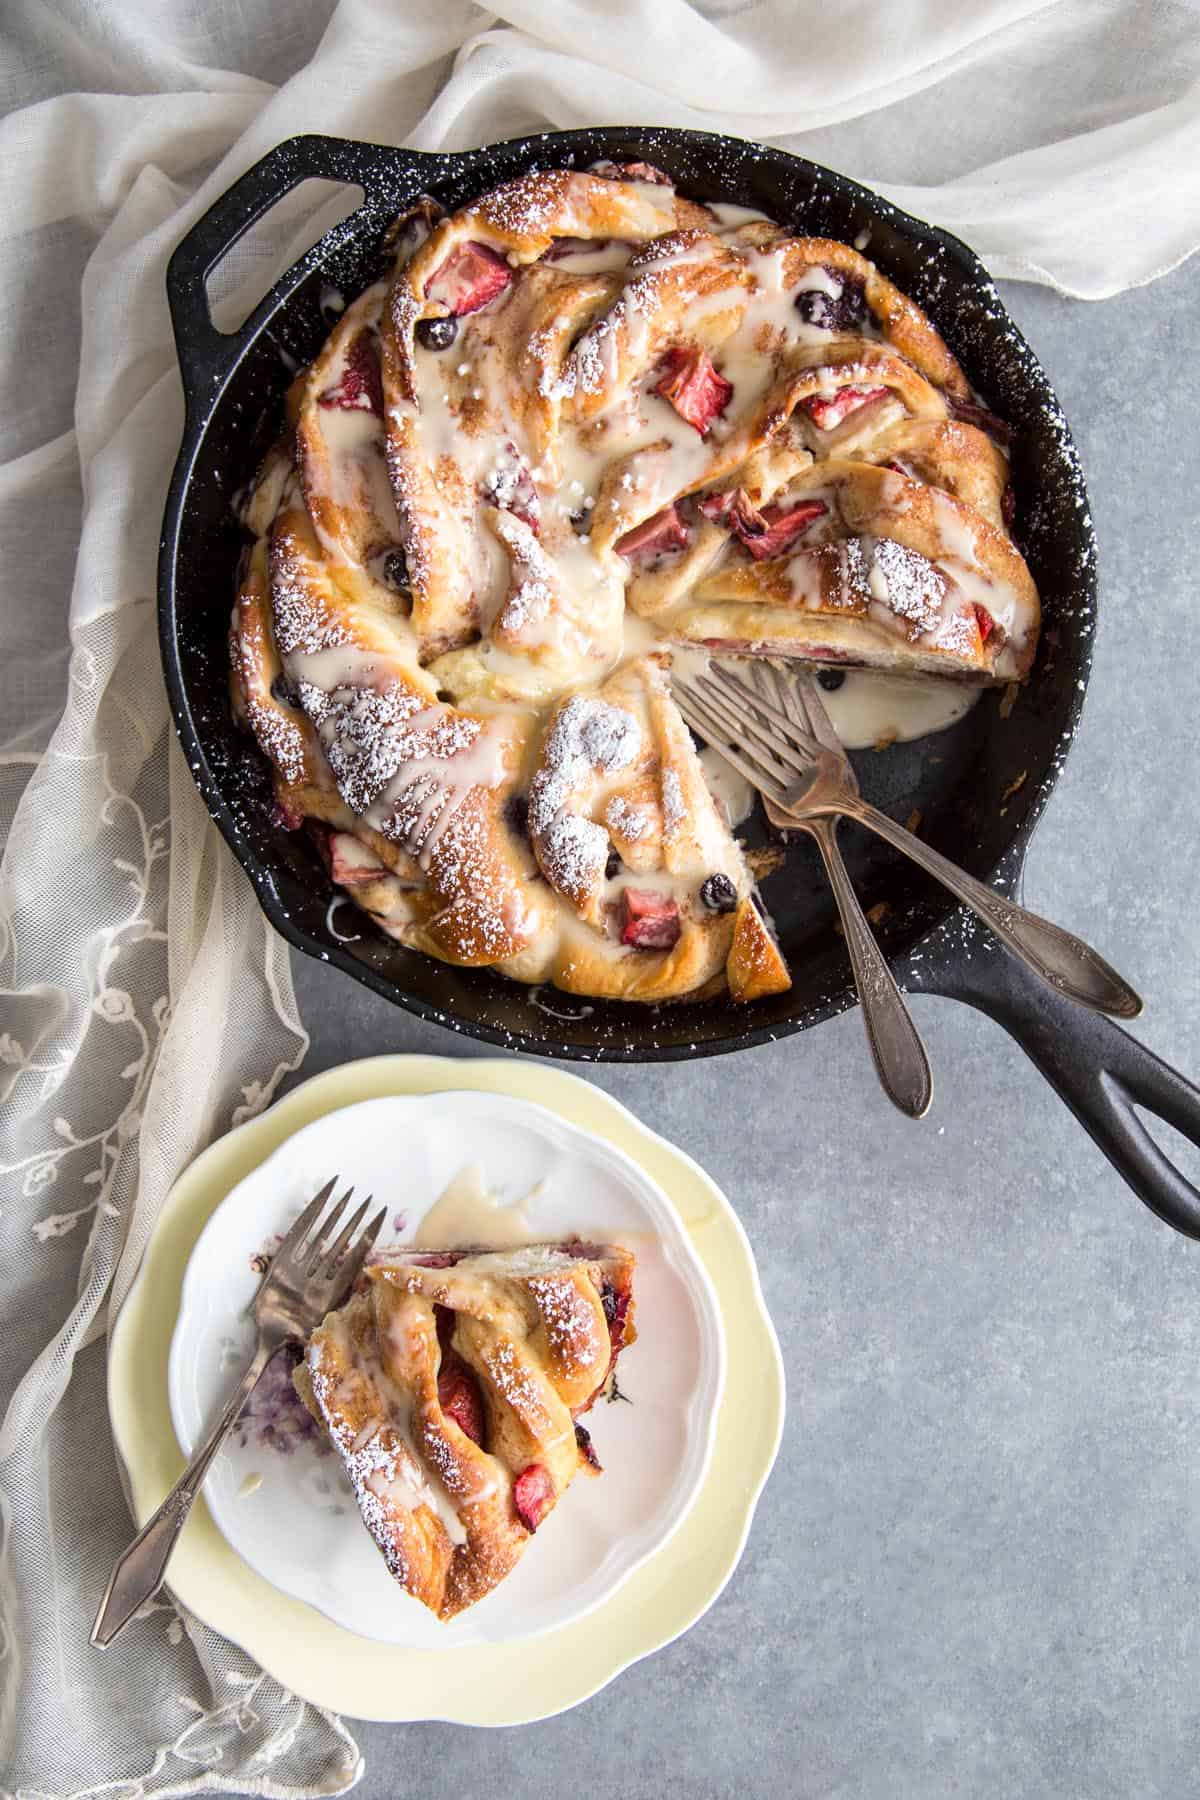 Cinnamon swirl bread in a cast iron skillet next to a slice of bread on a plate